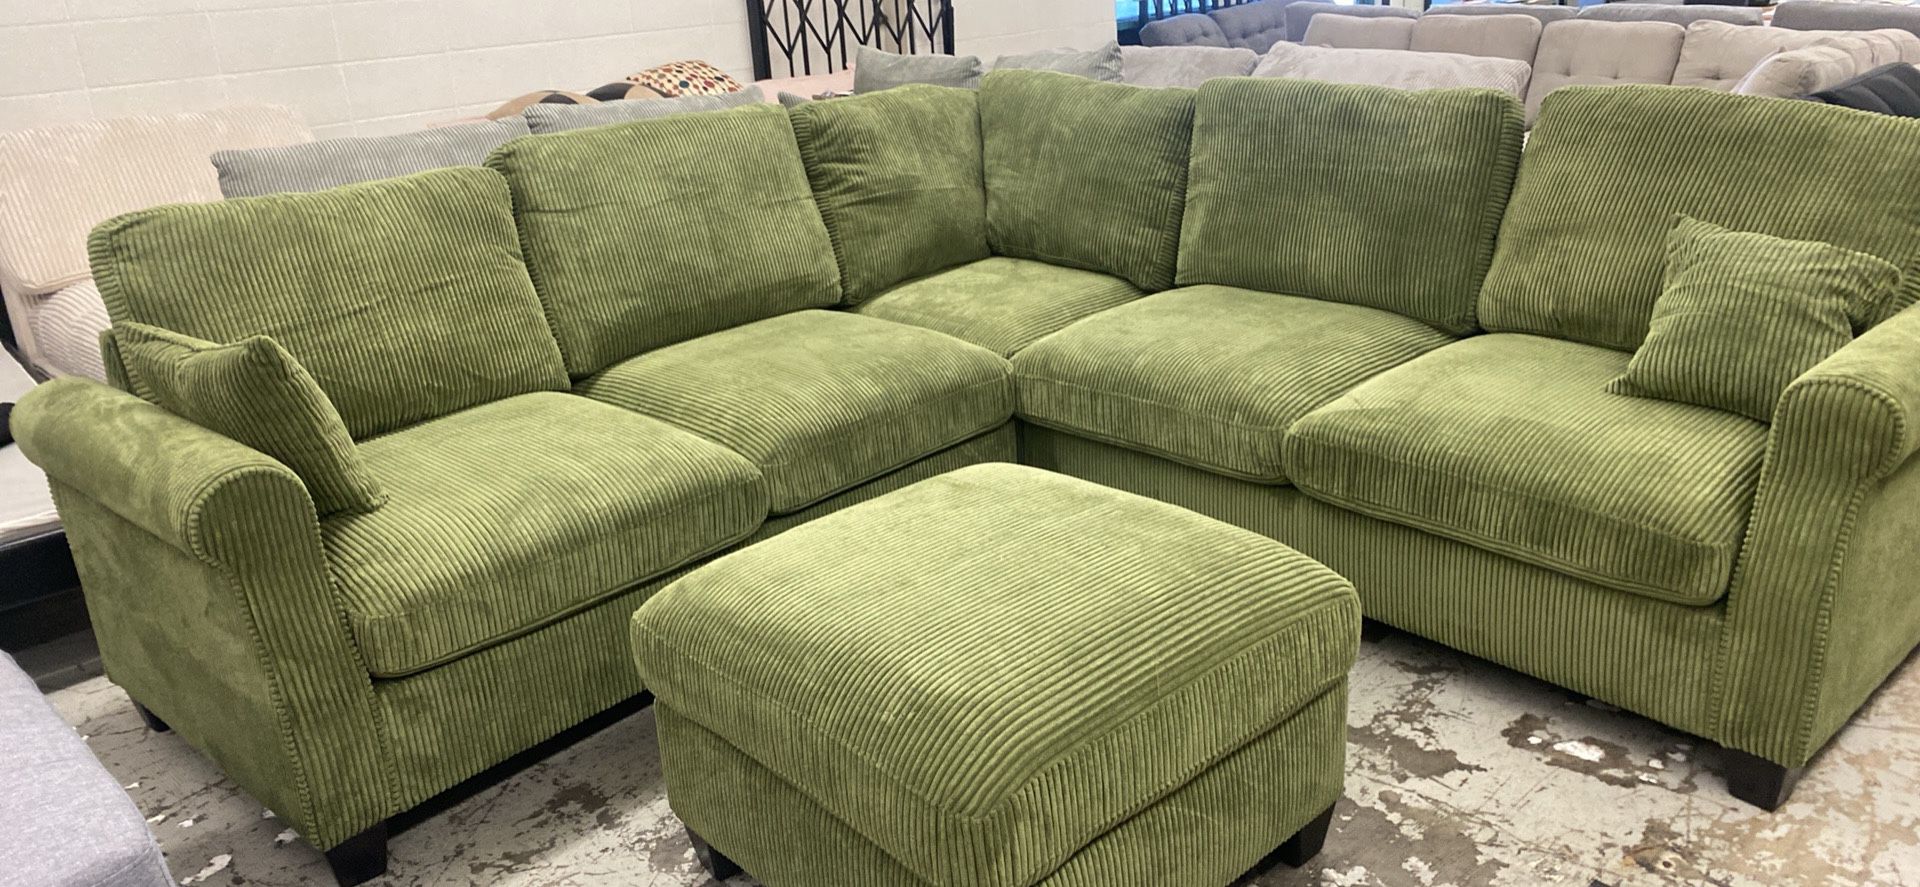 New 99x99 Sage Corduroy Sectional Couch Set / Free Delivery 